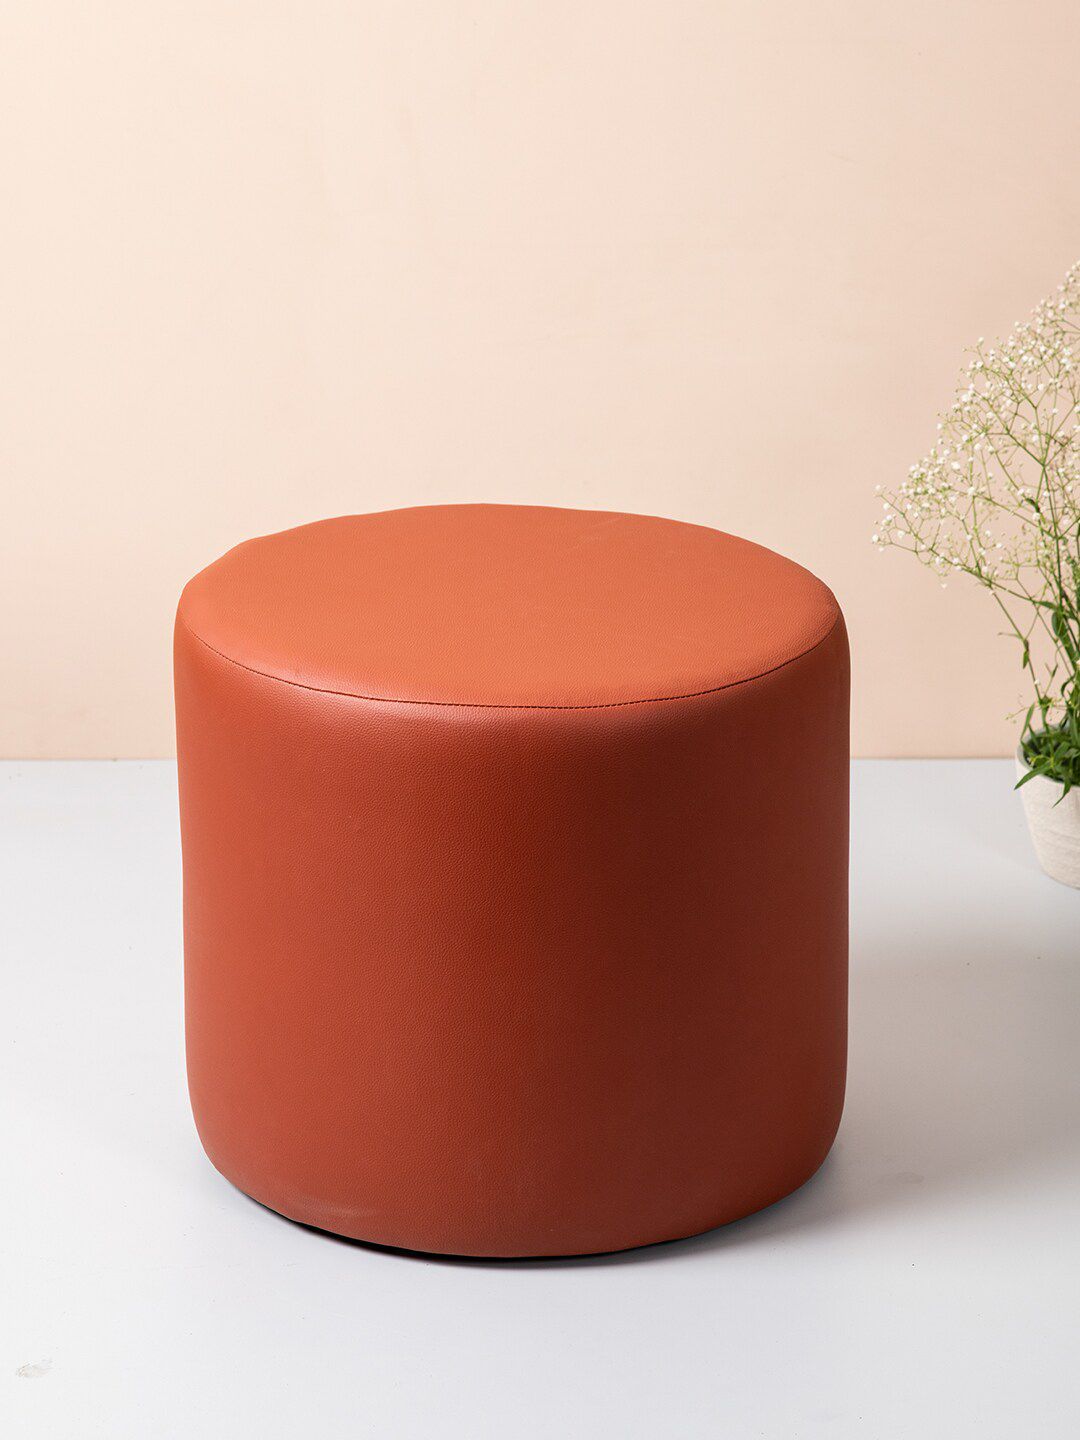 nestroots Brown Round Poufe Ottoman Price in India